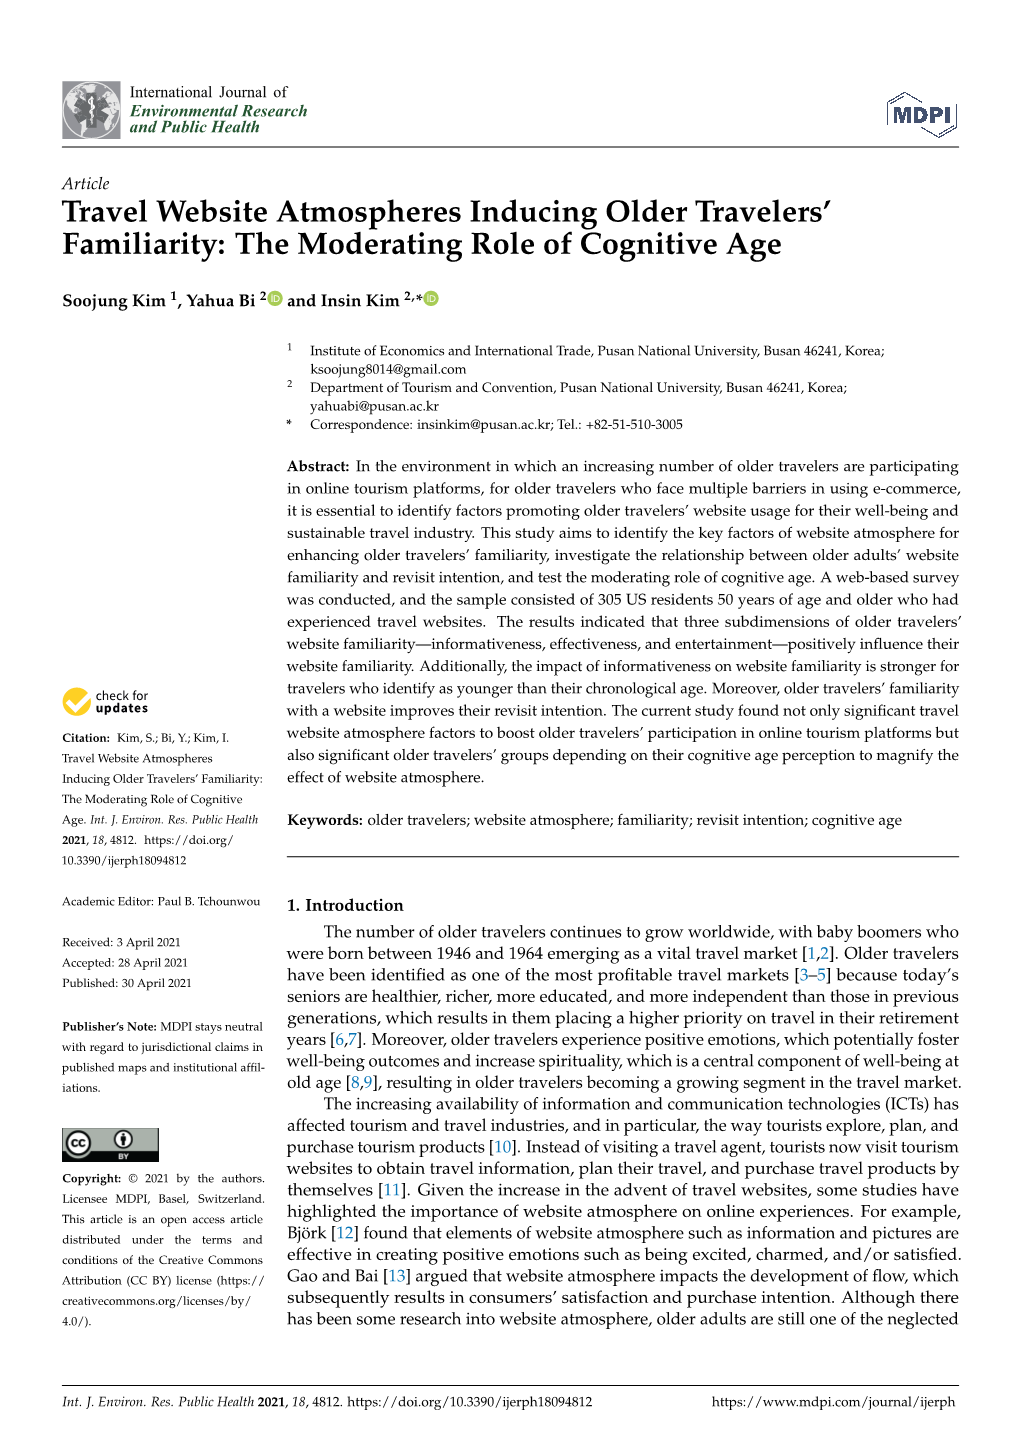 Travel Website Atmospheres Inducing Older Travelers' Familiarity: the Moderating Role of Cognitive